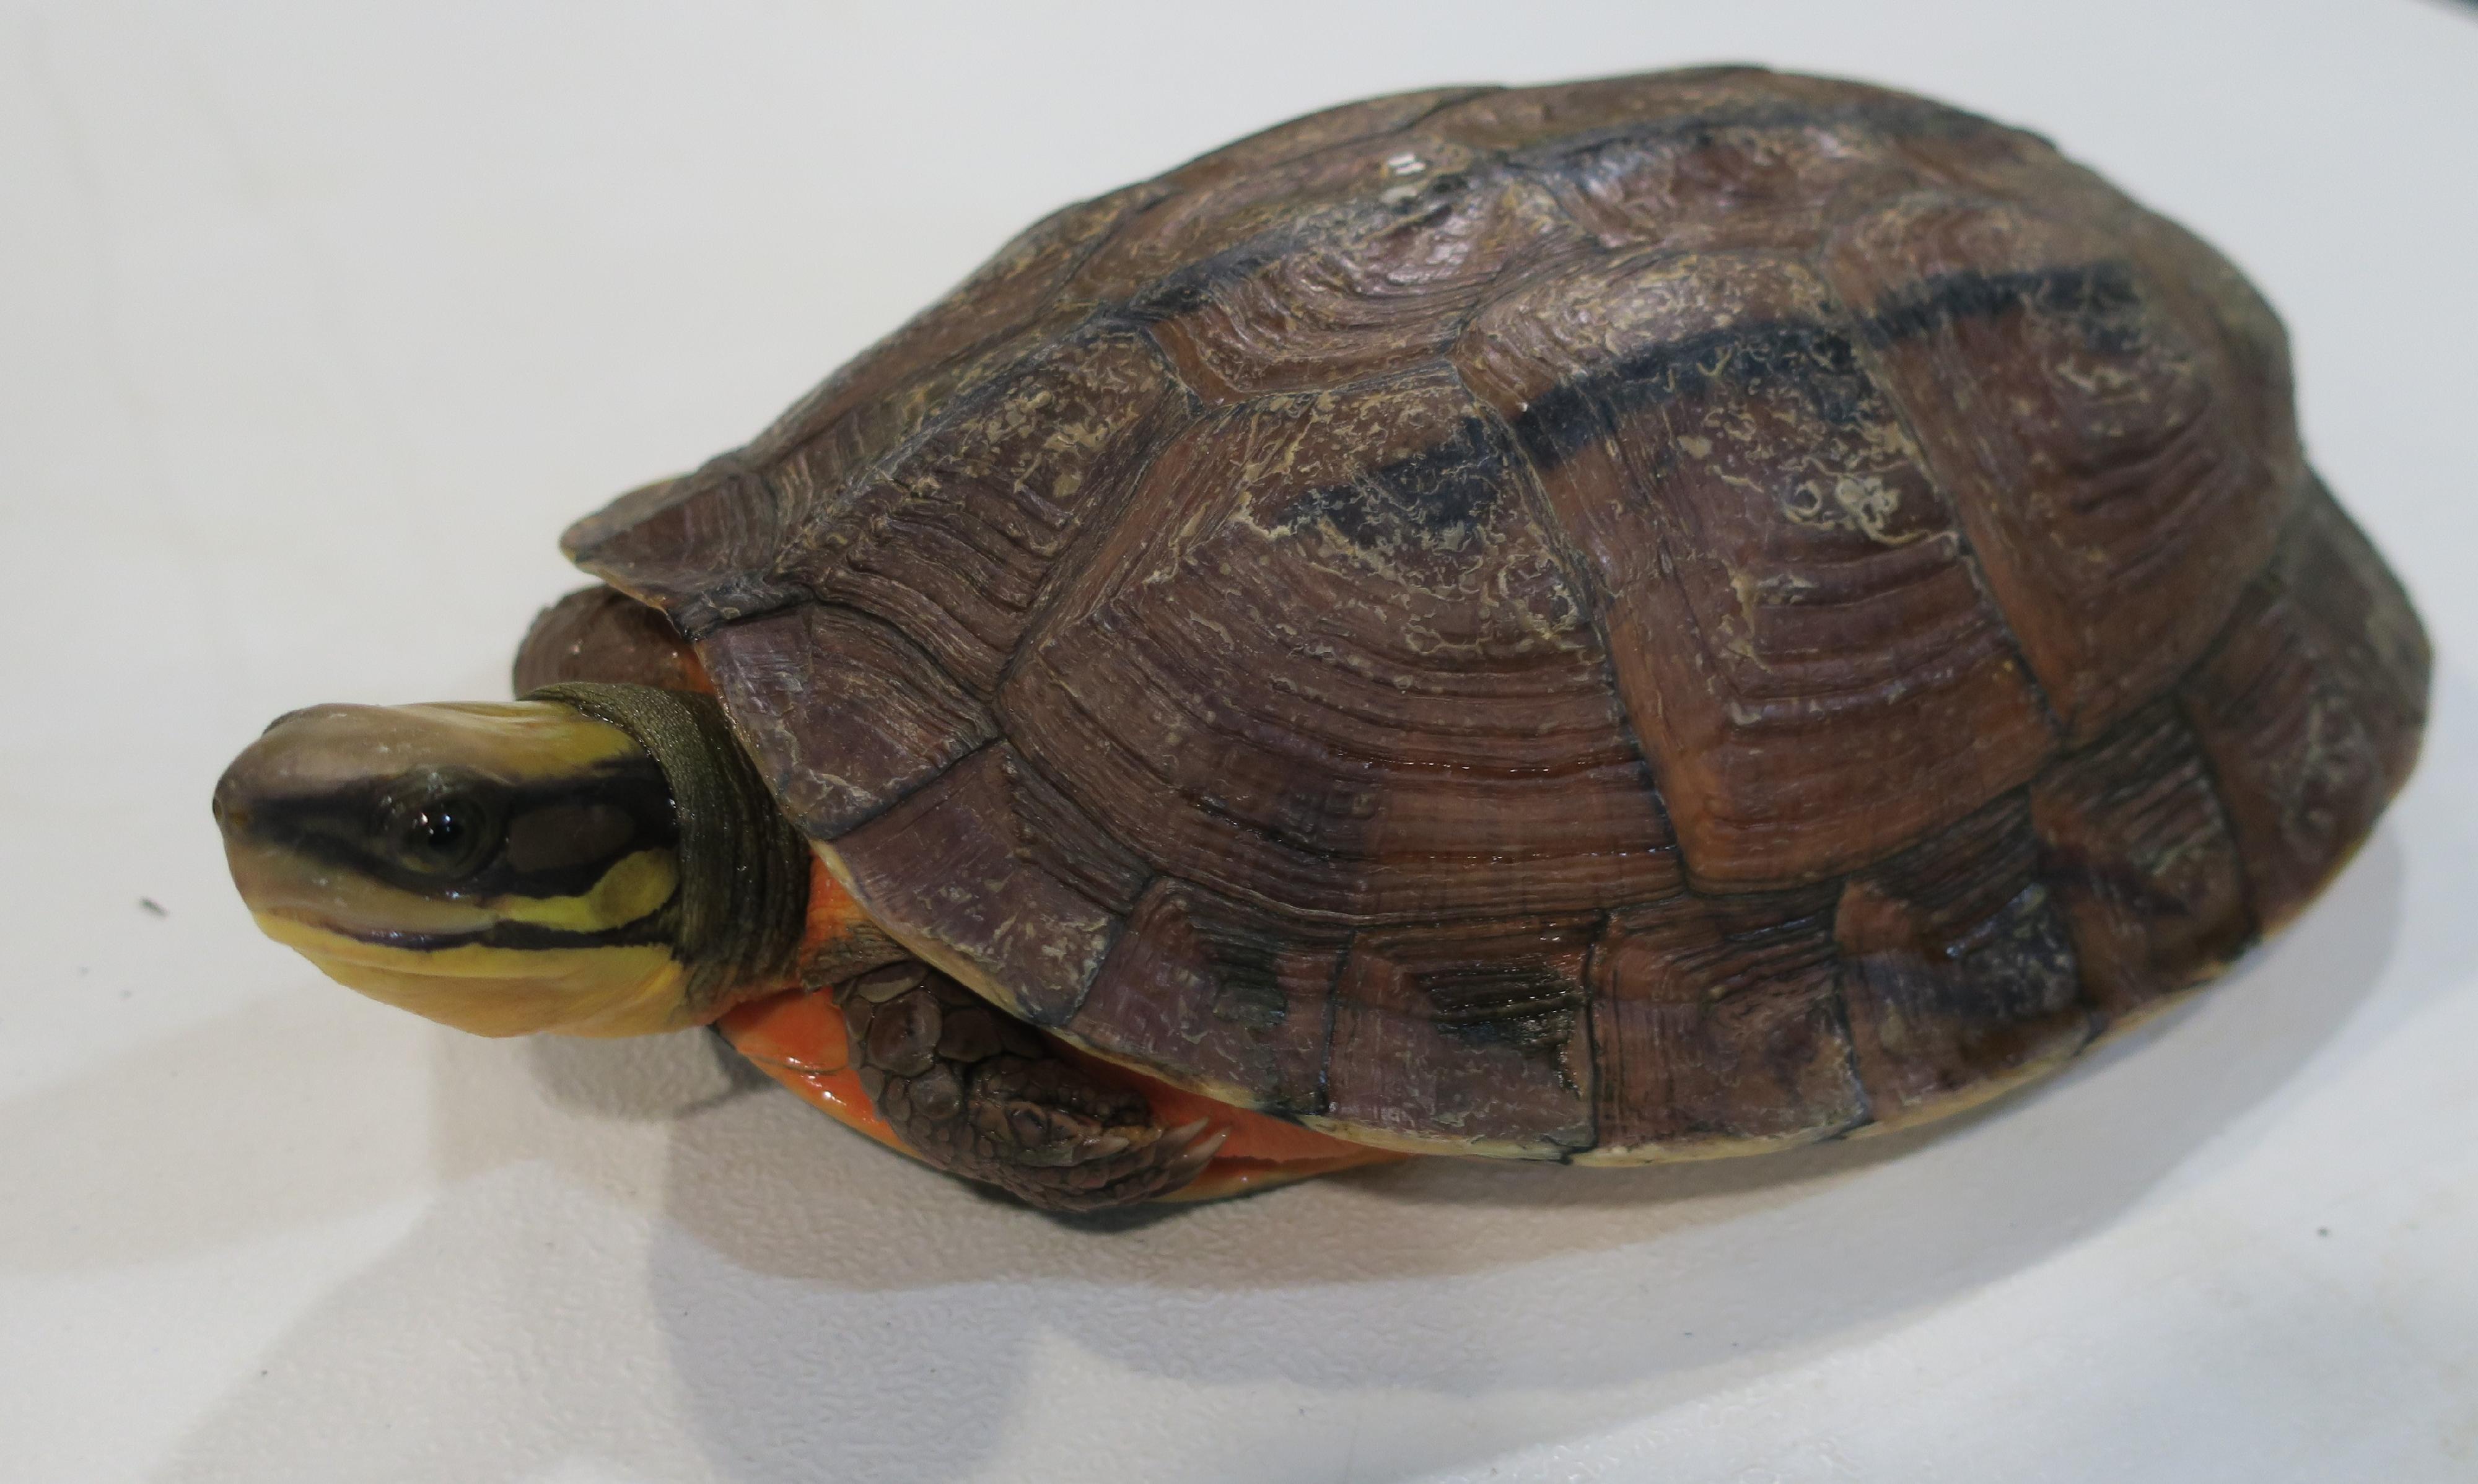 The Agriculture, Fisheries and Conservation Department seized three live endangered animals and an endangered animal specimen suspected to be illegally possessed in an exhibition today (September 23). Photo shows the seized live golden coin turtle.